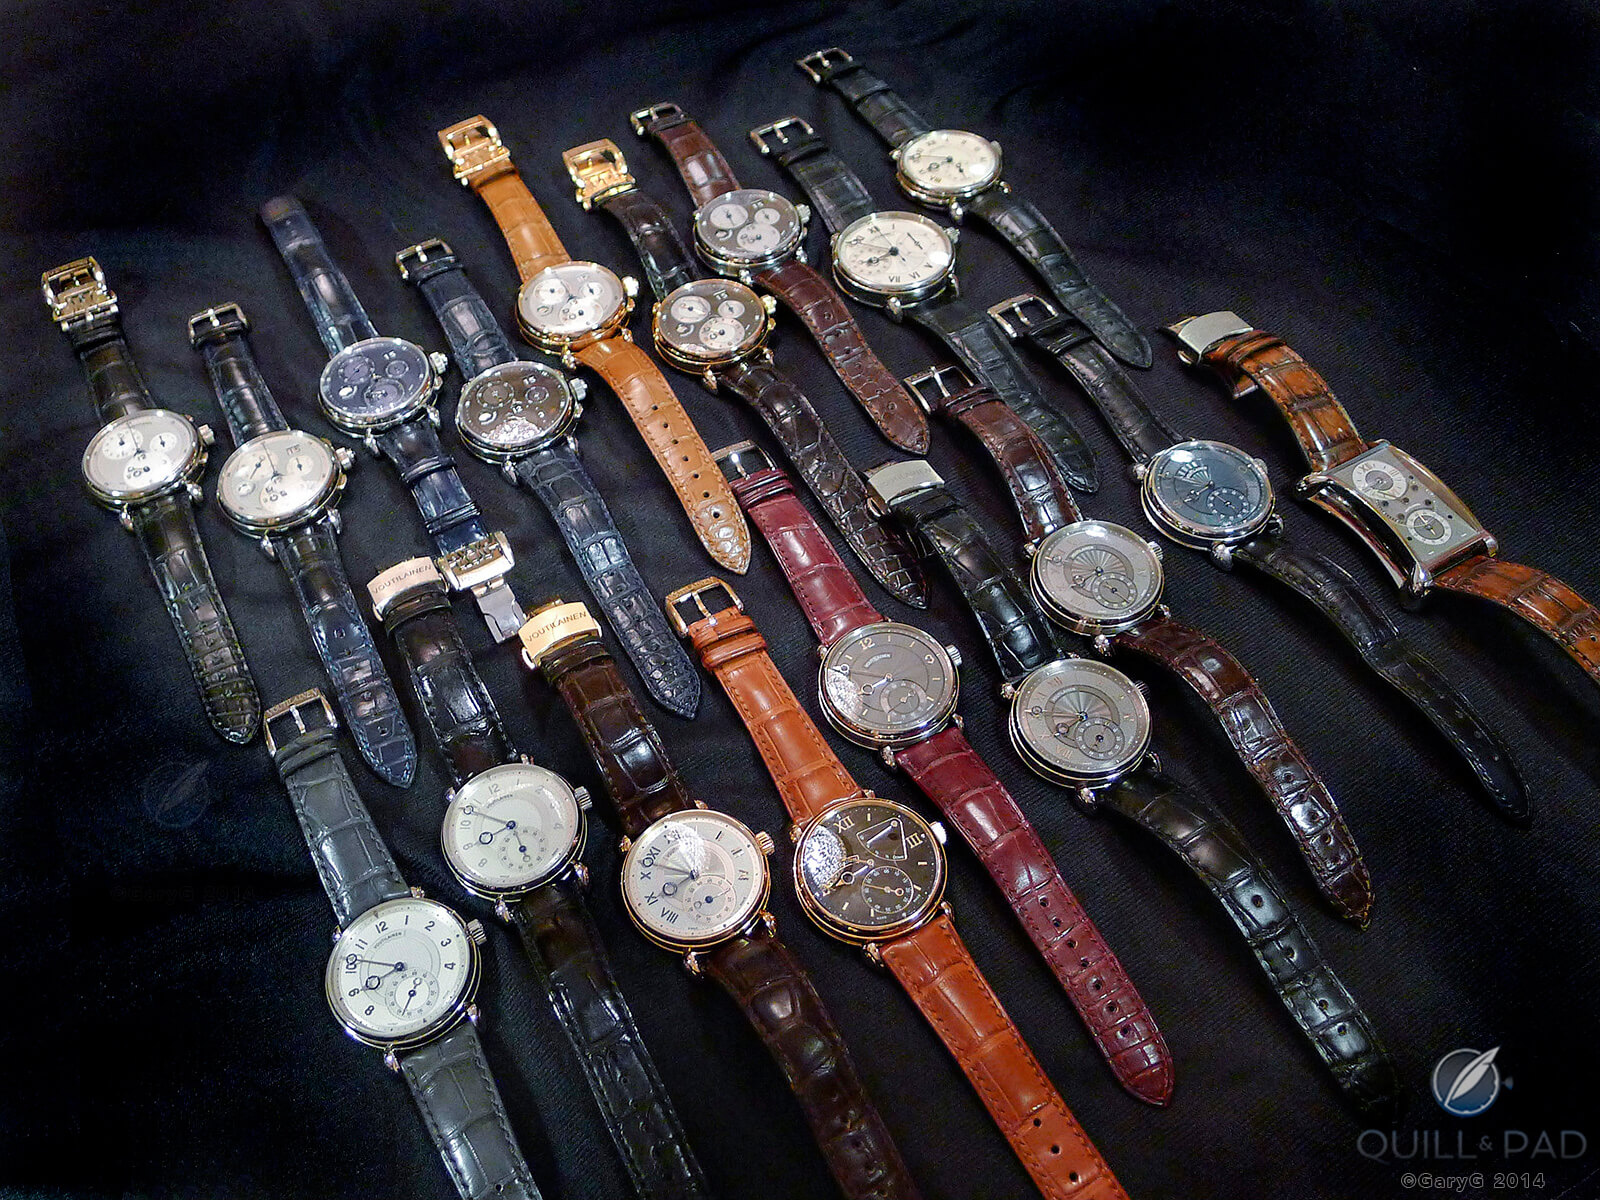 A collection of Kari Voutilainen watches at a collector dinner: three types of chronographs (series 1, series 2, mono pusher), Observatoire, Vingt-8, Cal. 27, Masterpiece No. 8 Decimal Repeater, and V8-R